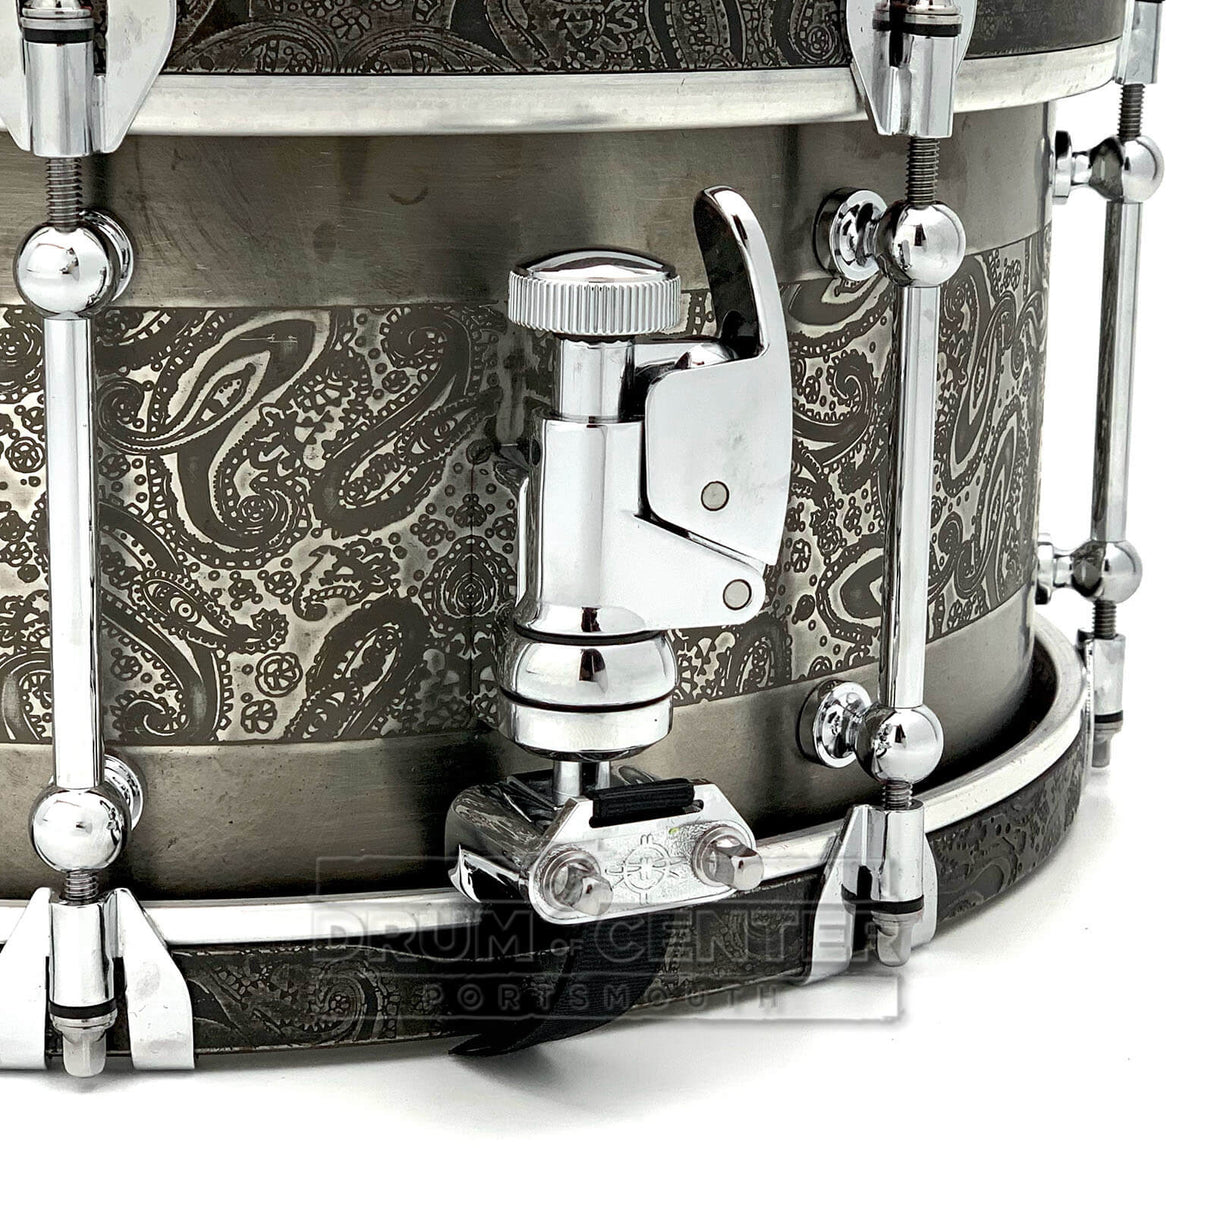 Dunnett Classic Steel Snare Drum 14x6.5 w/Shell & Hoops Engraved by James Trussart - Drum Center Of Portsmouth